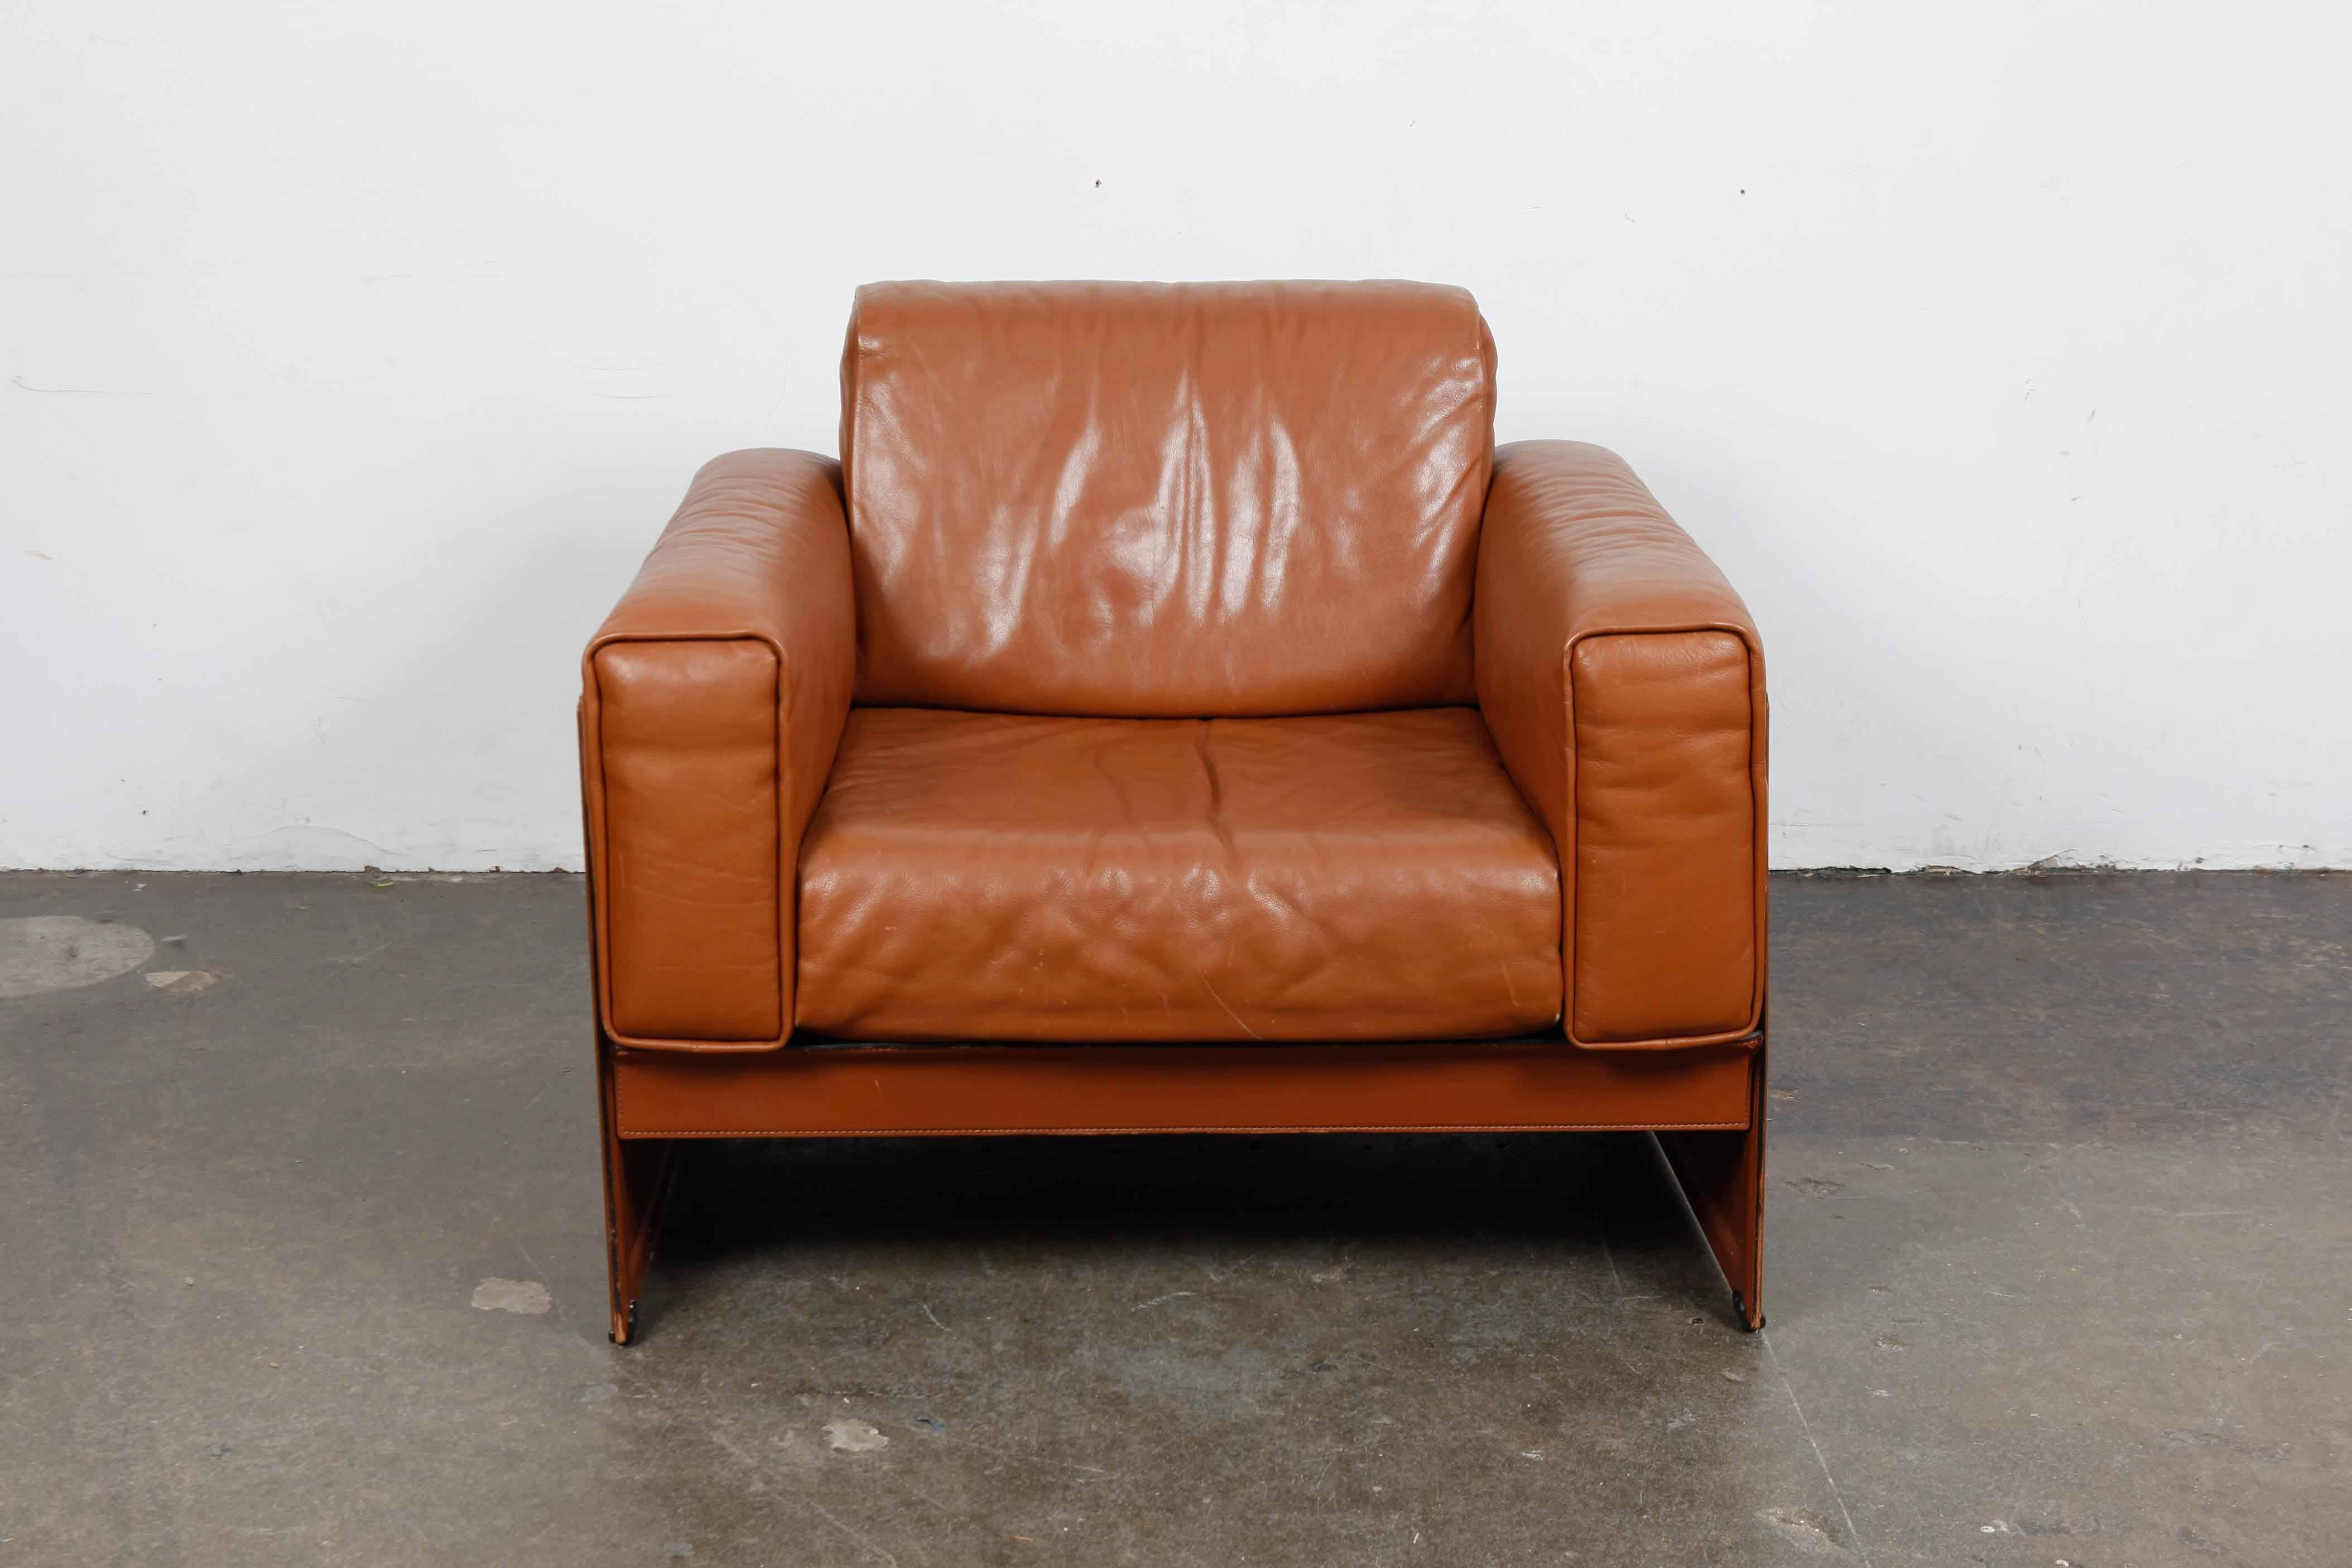 Original cognac leather 'Korium' lounge chairs by Tito Agnoli for Matteo Grassi, designed in 1980. Frame of the chair is steel covered completely in leather, really beautiful chair in original leather.